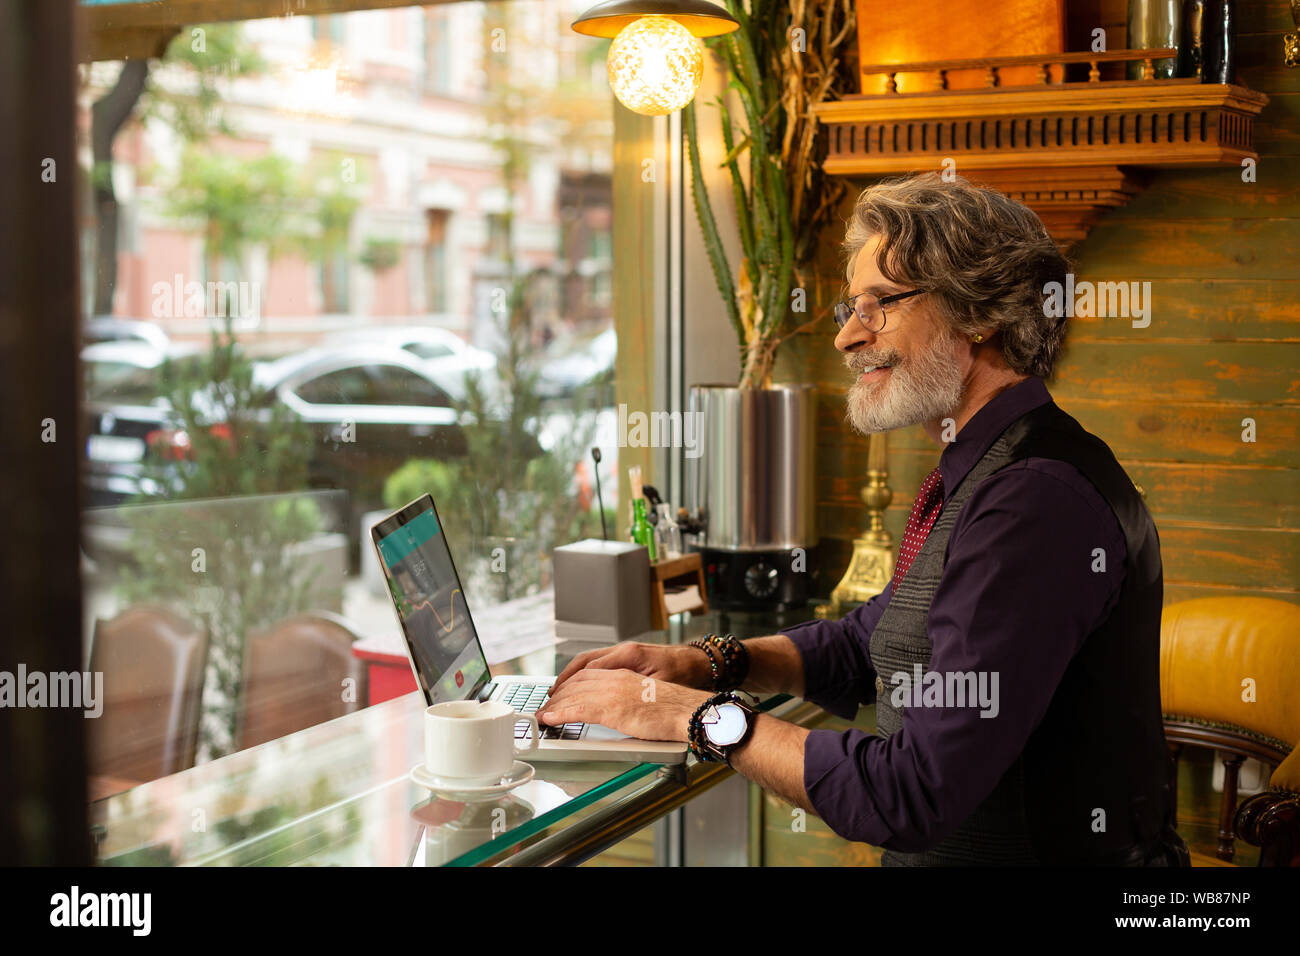 Smiling man sitting in a coffee shop. Banque D'Images